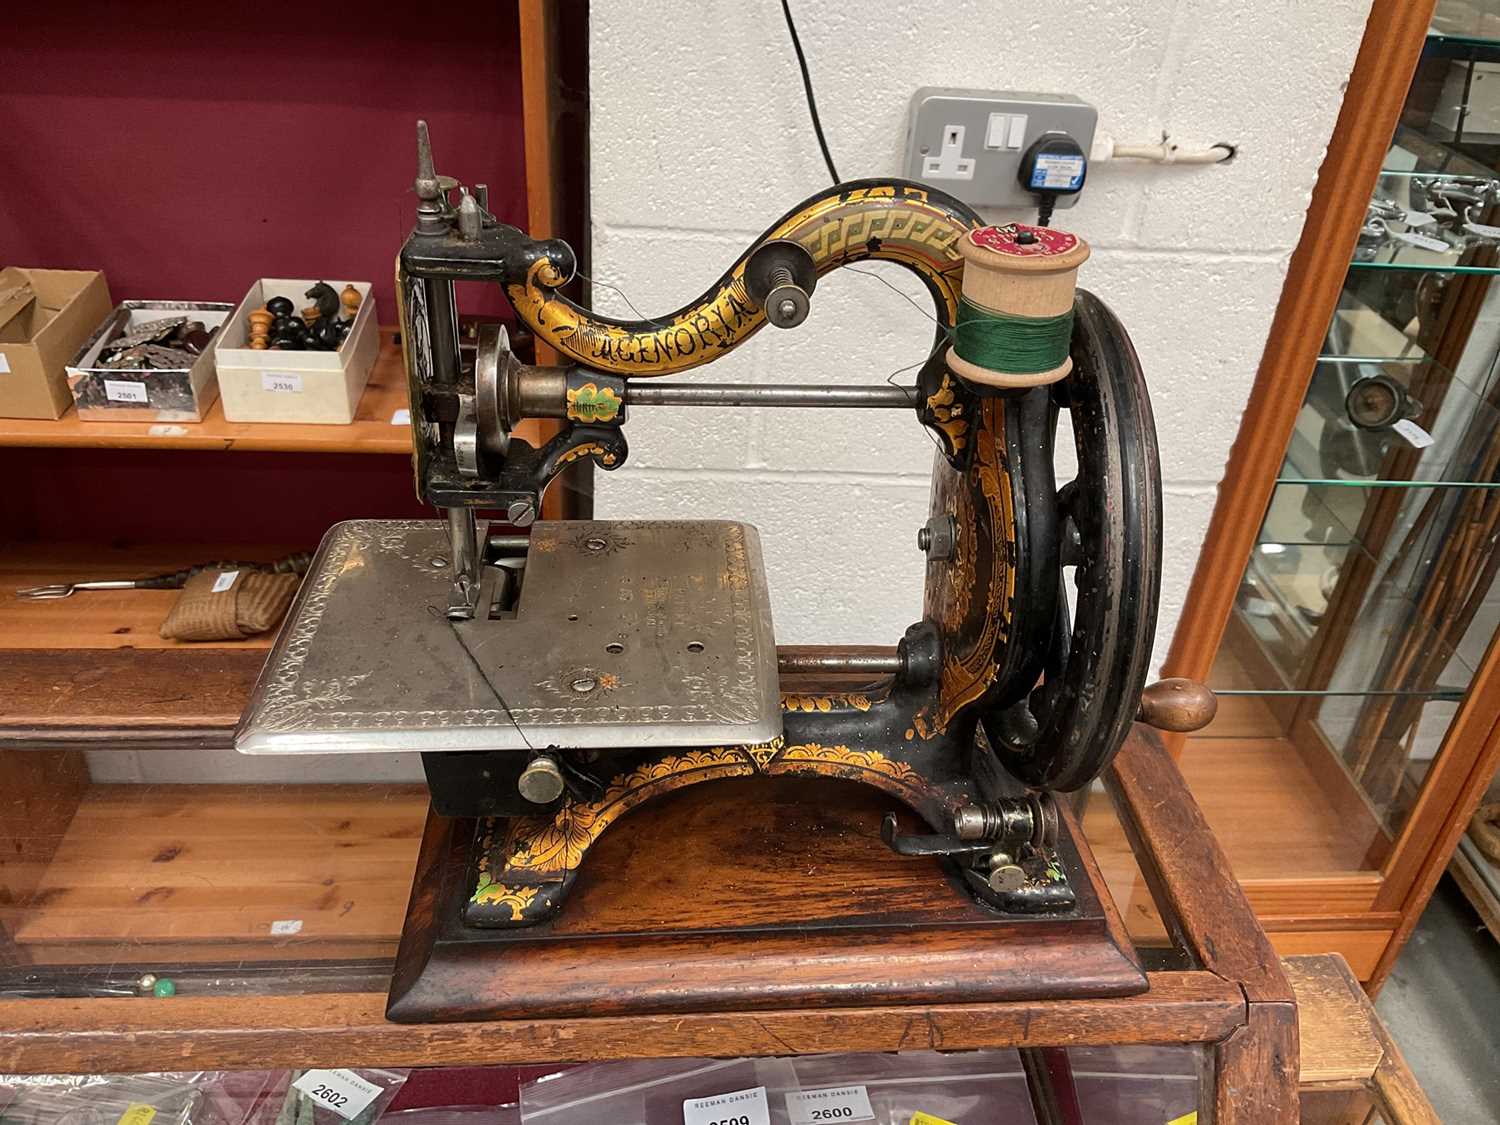 A rare Maxfield 'Agenoria' Works, Birmingham, sewing machine, engraved 'By Appointment to HRH Princ - Image 5 of 6